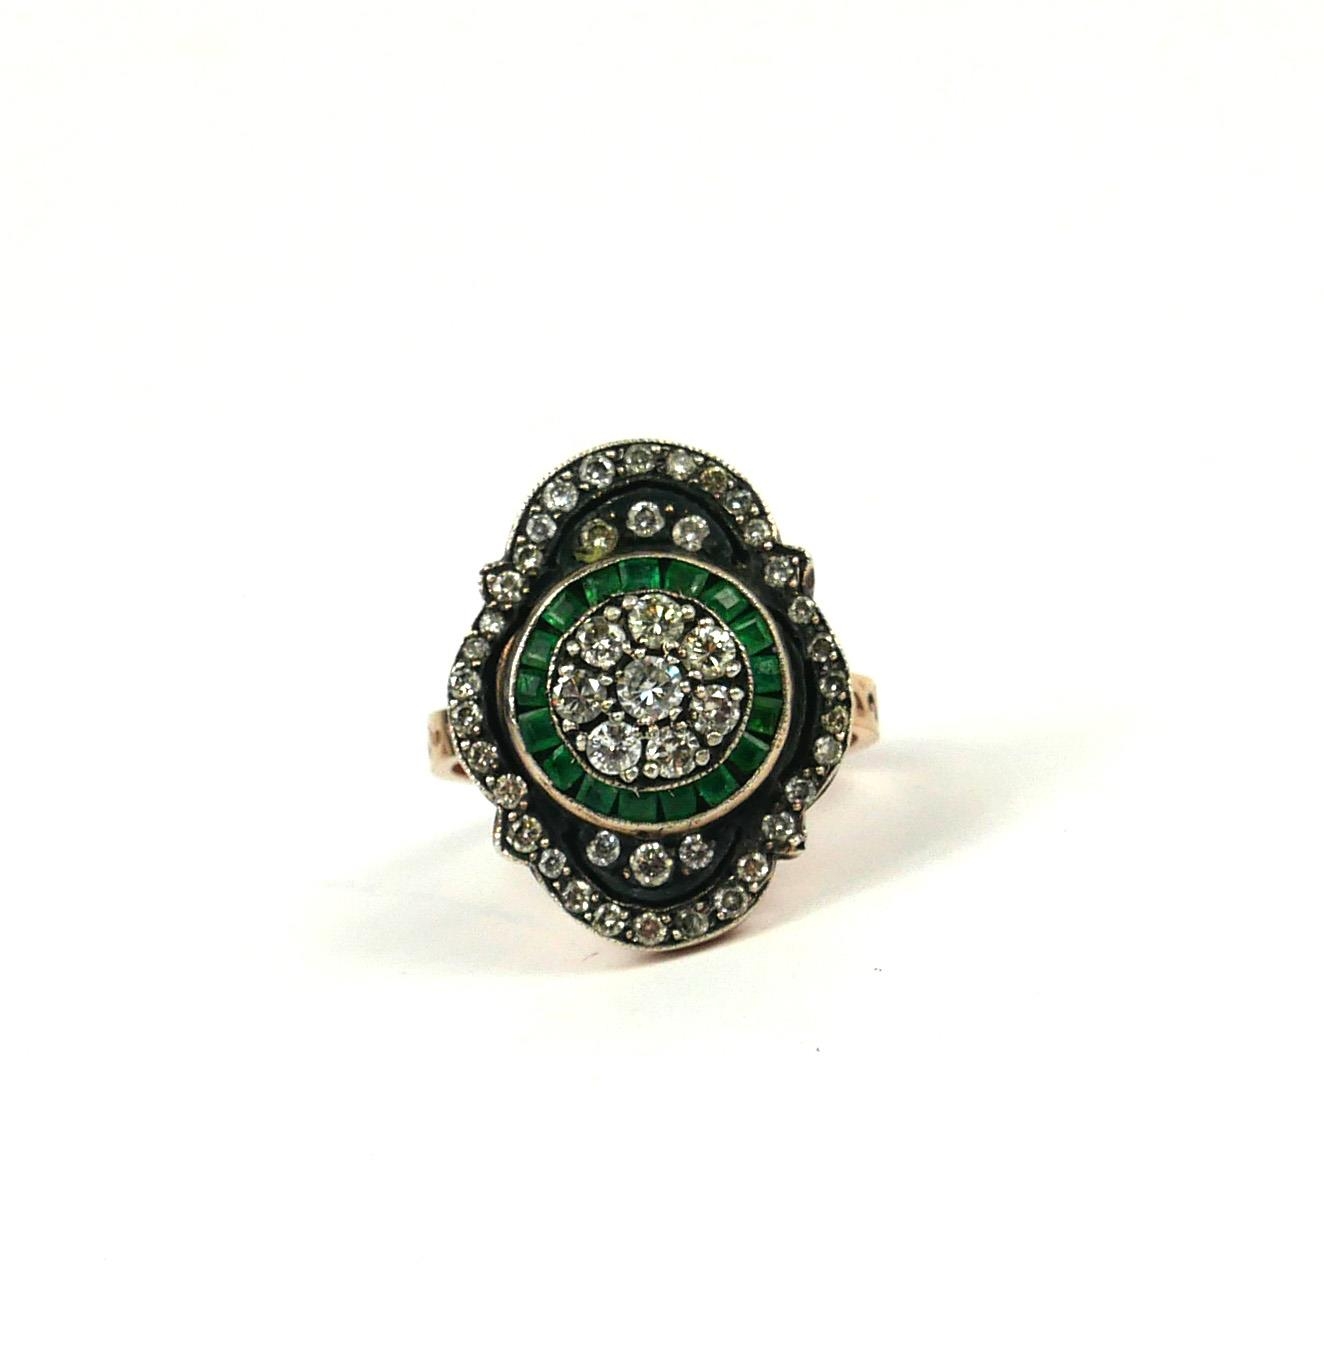 A VINTAGE STYLE 8CT ROSE GOLD (SILVER TOP) RING set with round diamonds and emeralds.